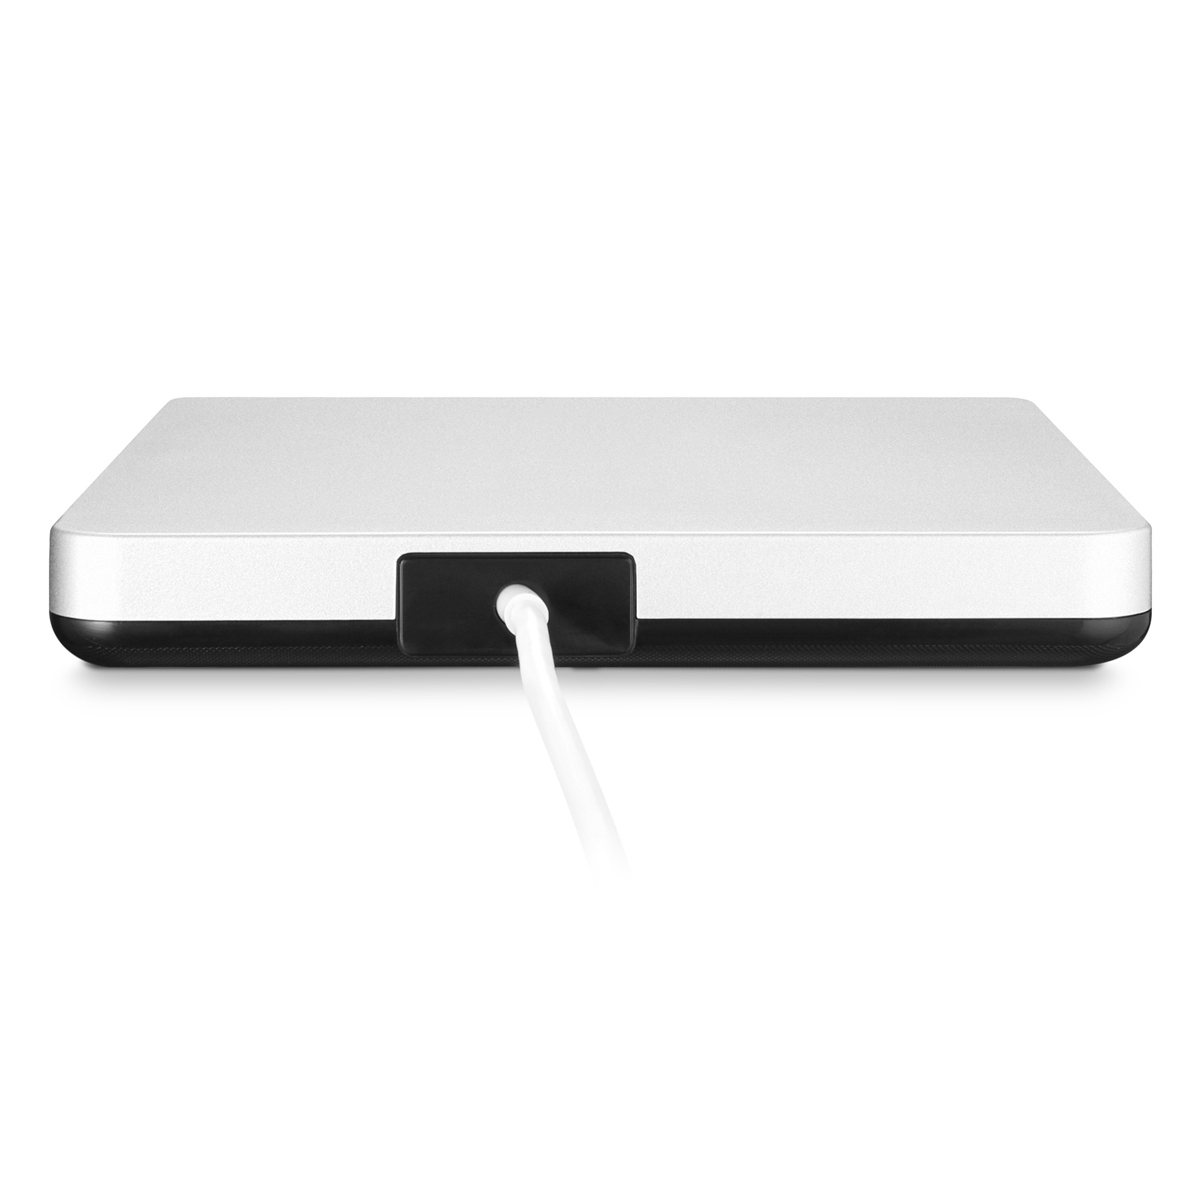 Portable-USB-30-Silver-External-DVD-RW-Max24X-High-speed-Data-Transmission-for-Win-XP-Win-7-Win-8-Wi-1701692-7